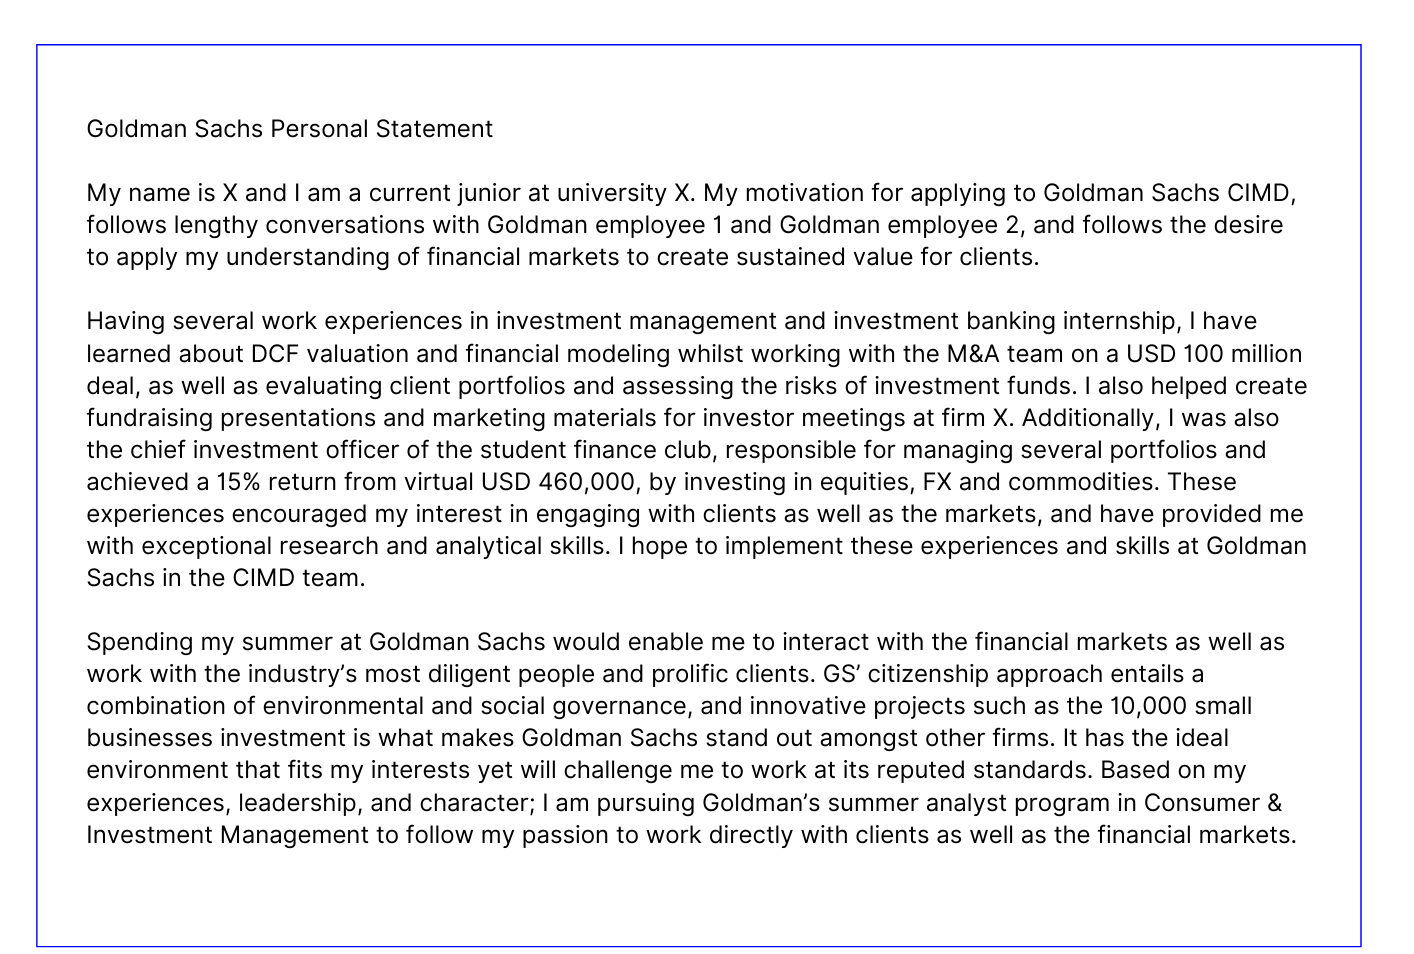 how to write a cover letter goldman sachs